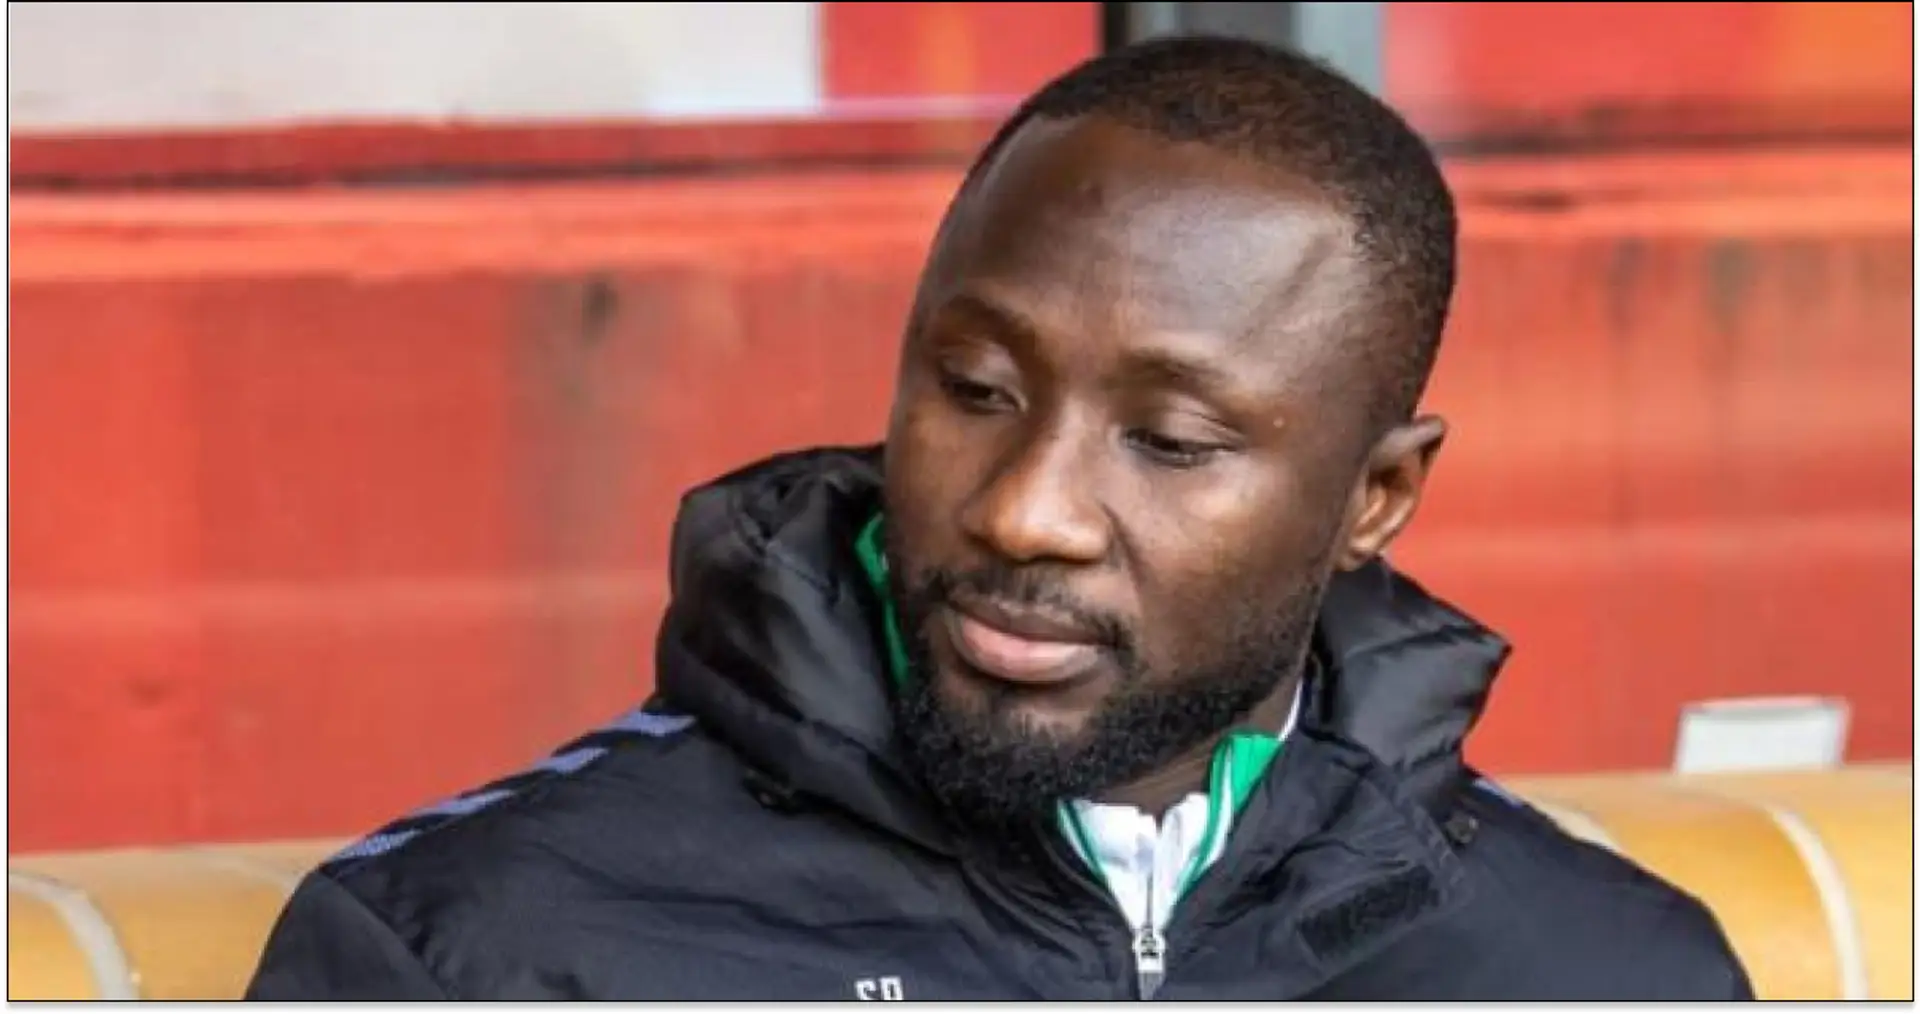 Naby Keita refuses to play for Werder, set to face 'consequences'